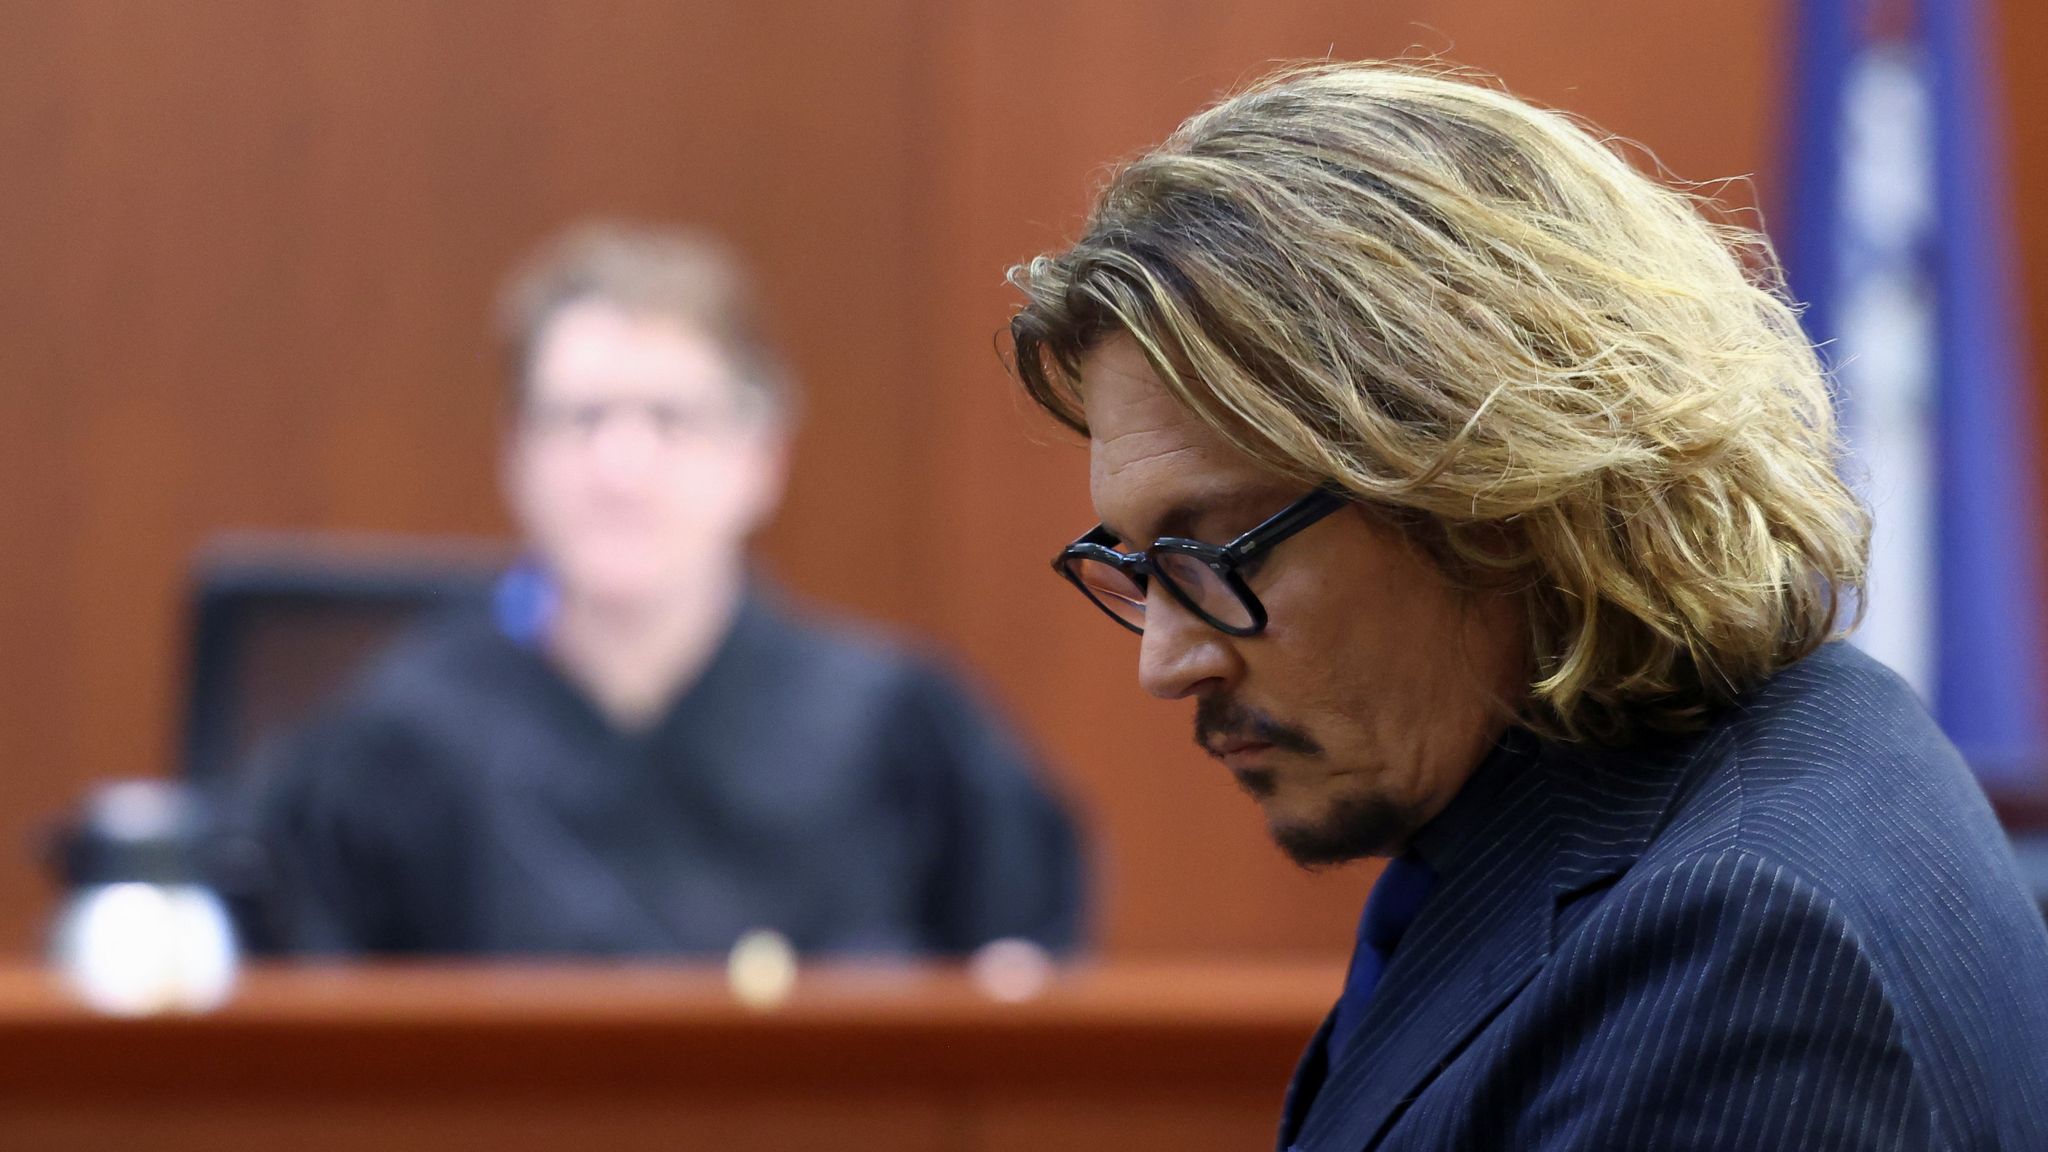 Johnny Depp's friend gets emotional in court - saying Amber Heard's ...